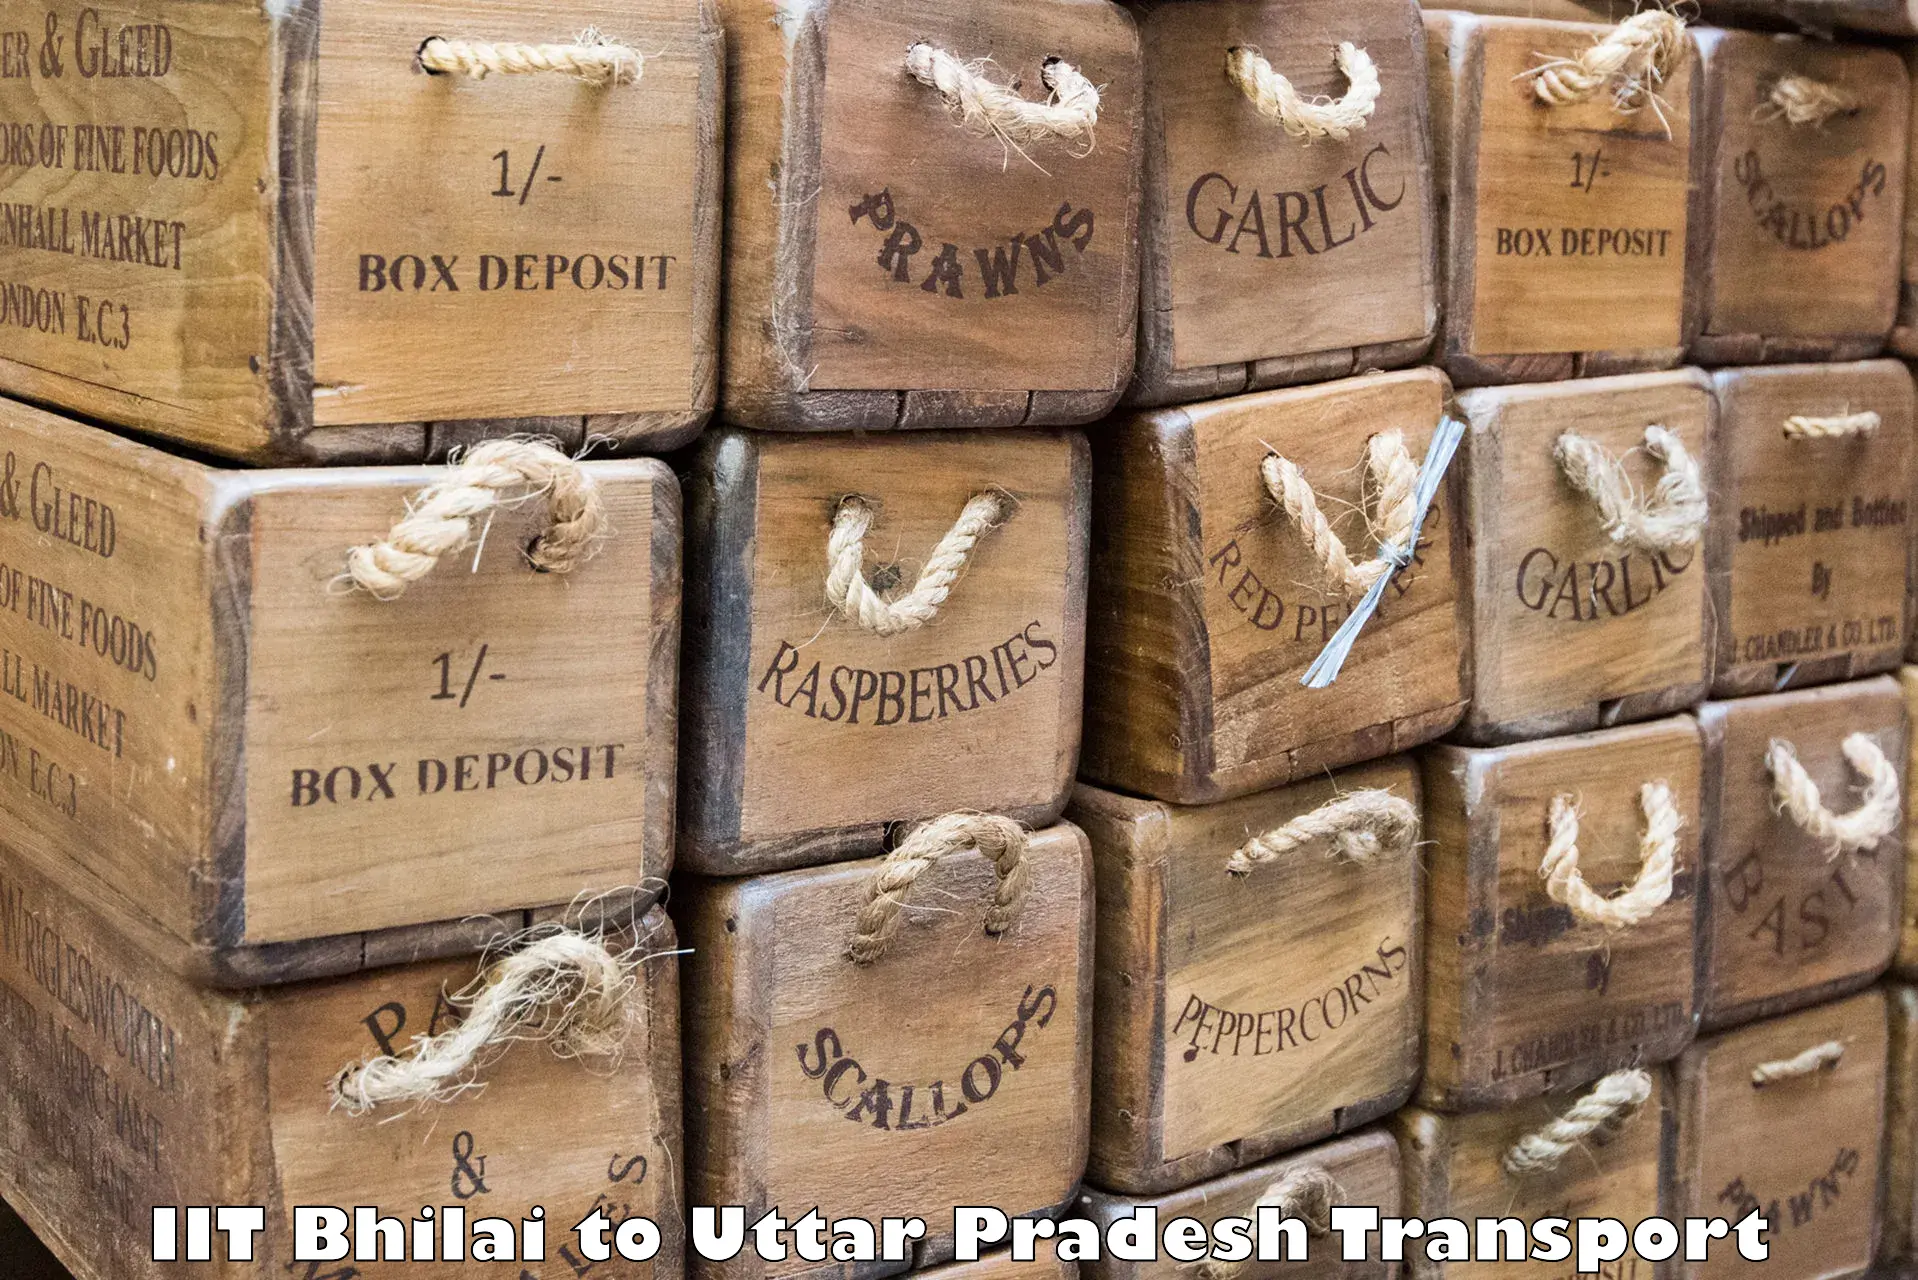 Package delivery services IIT Bhilai to Noida